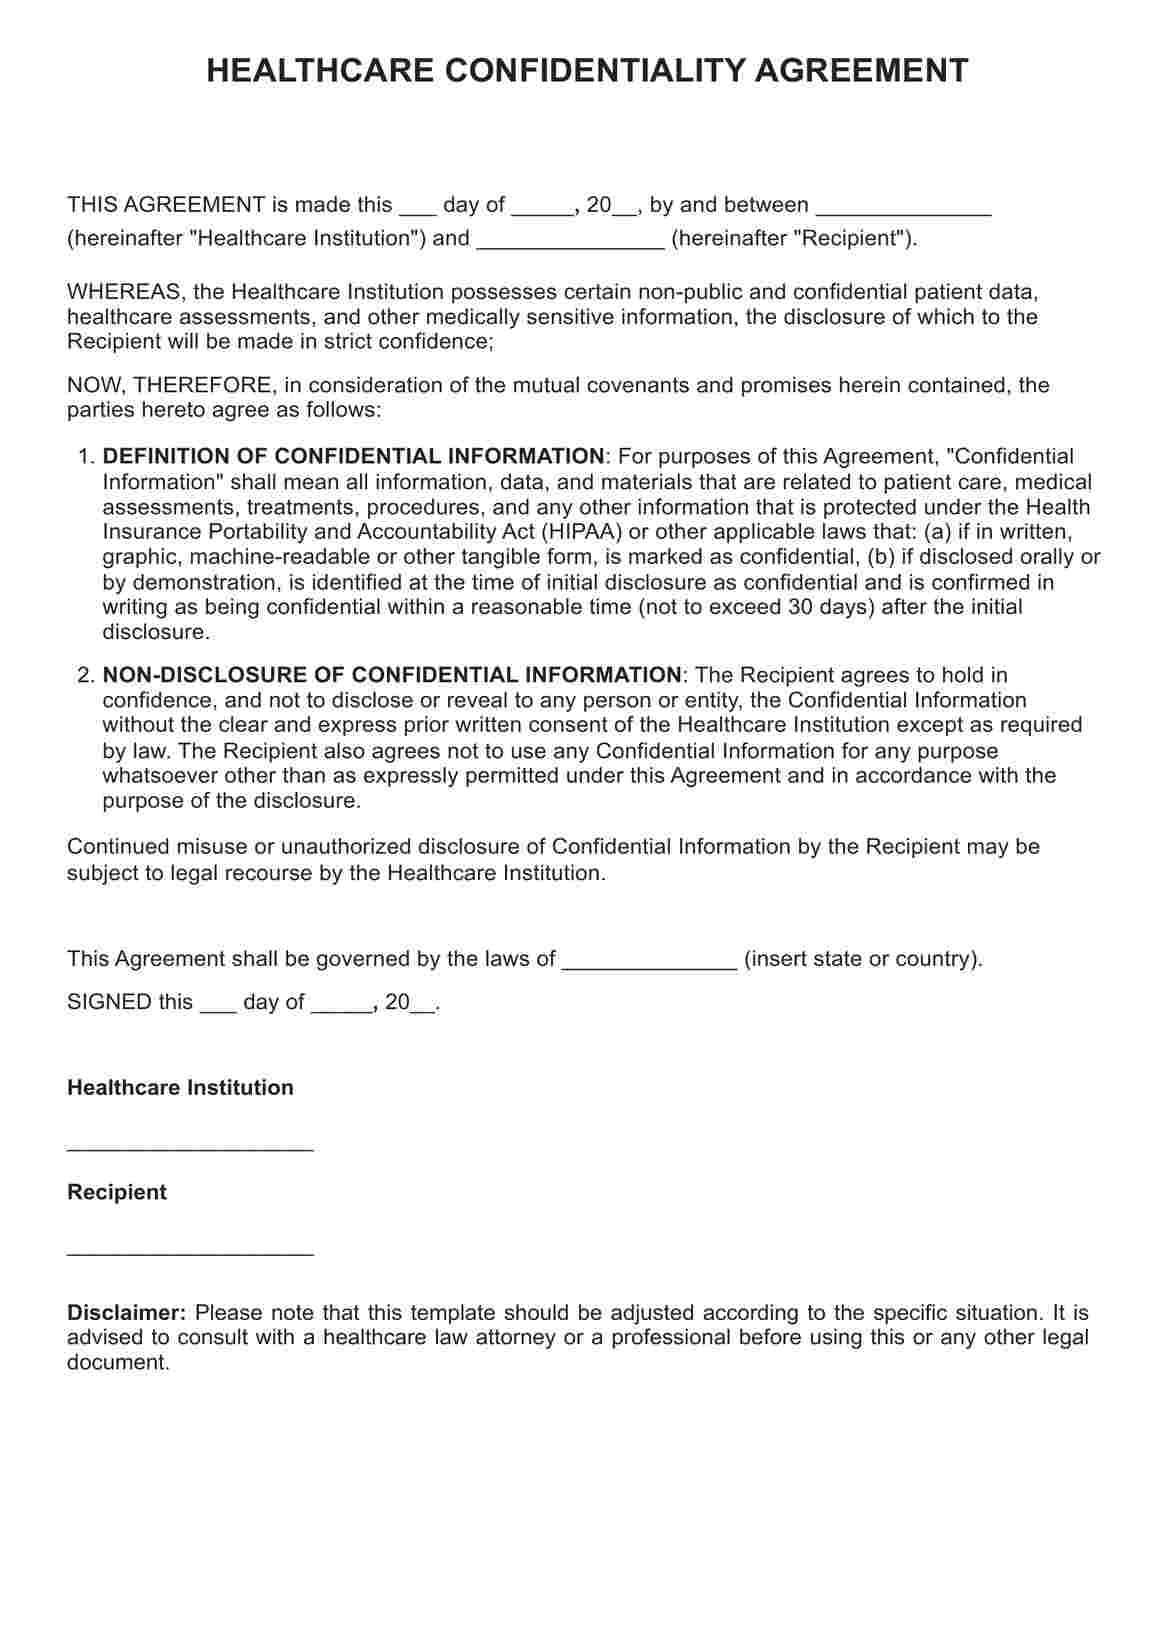 Confidentiality Statements PDF Example